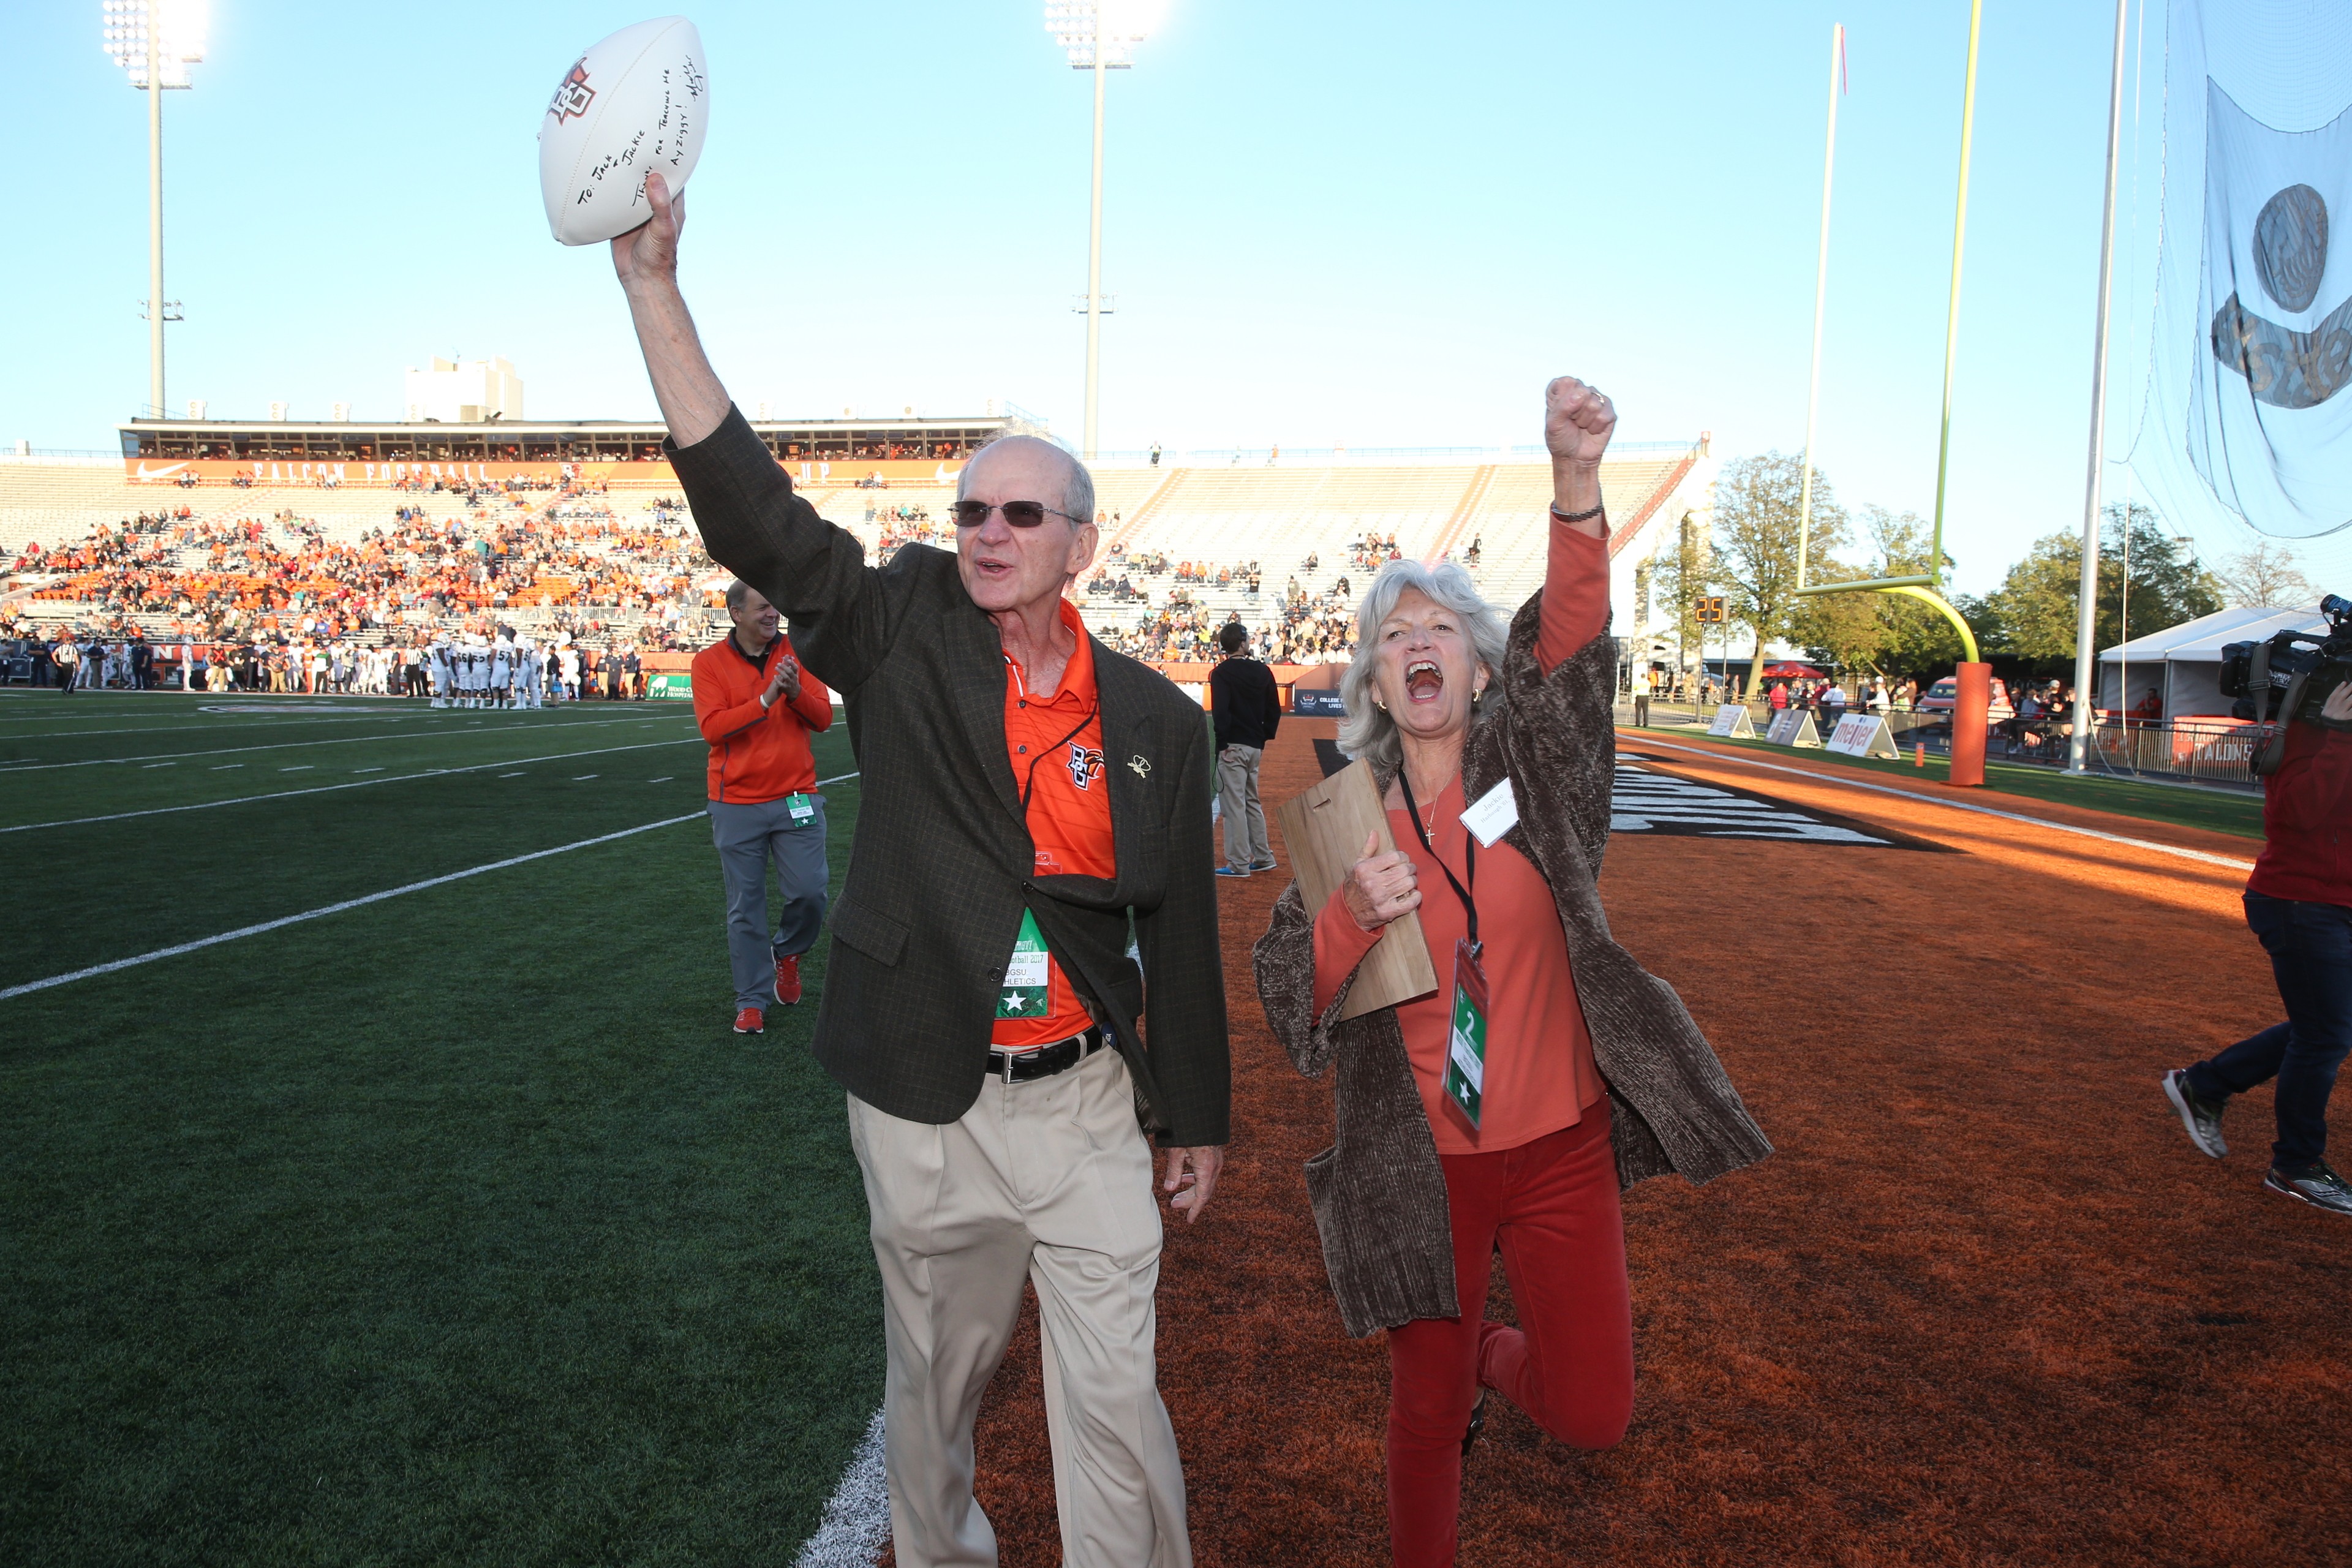 BGSU alumni Jack and Jackie Harbaugh cheer and hold a football at Doyt L. Perry Stadium